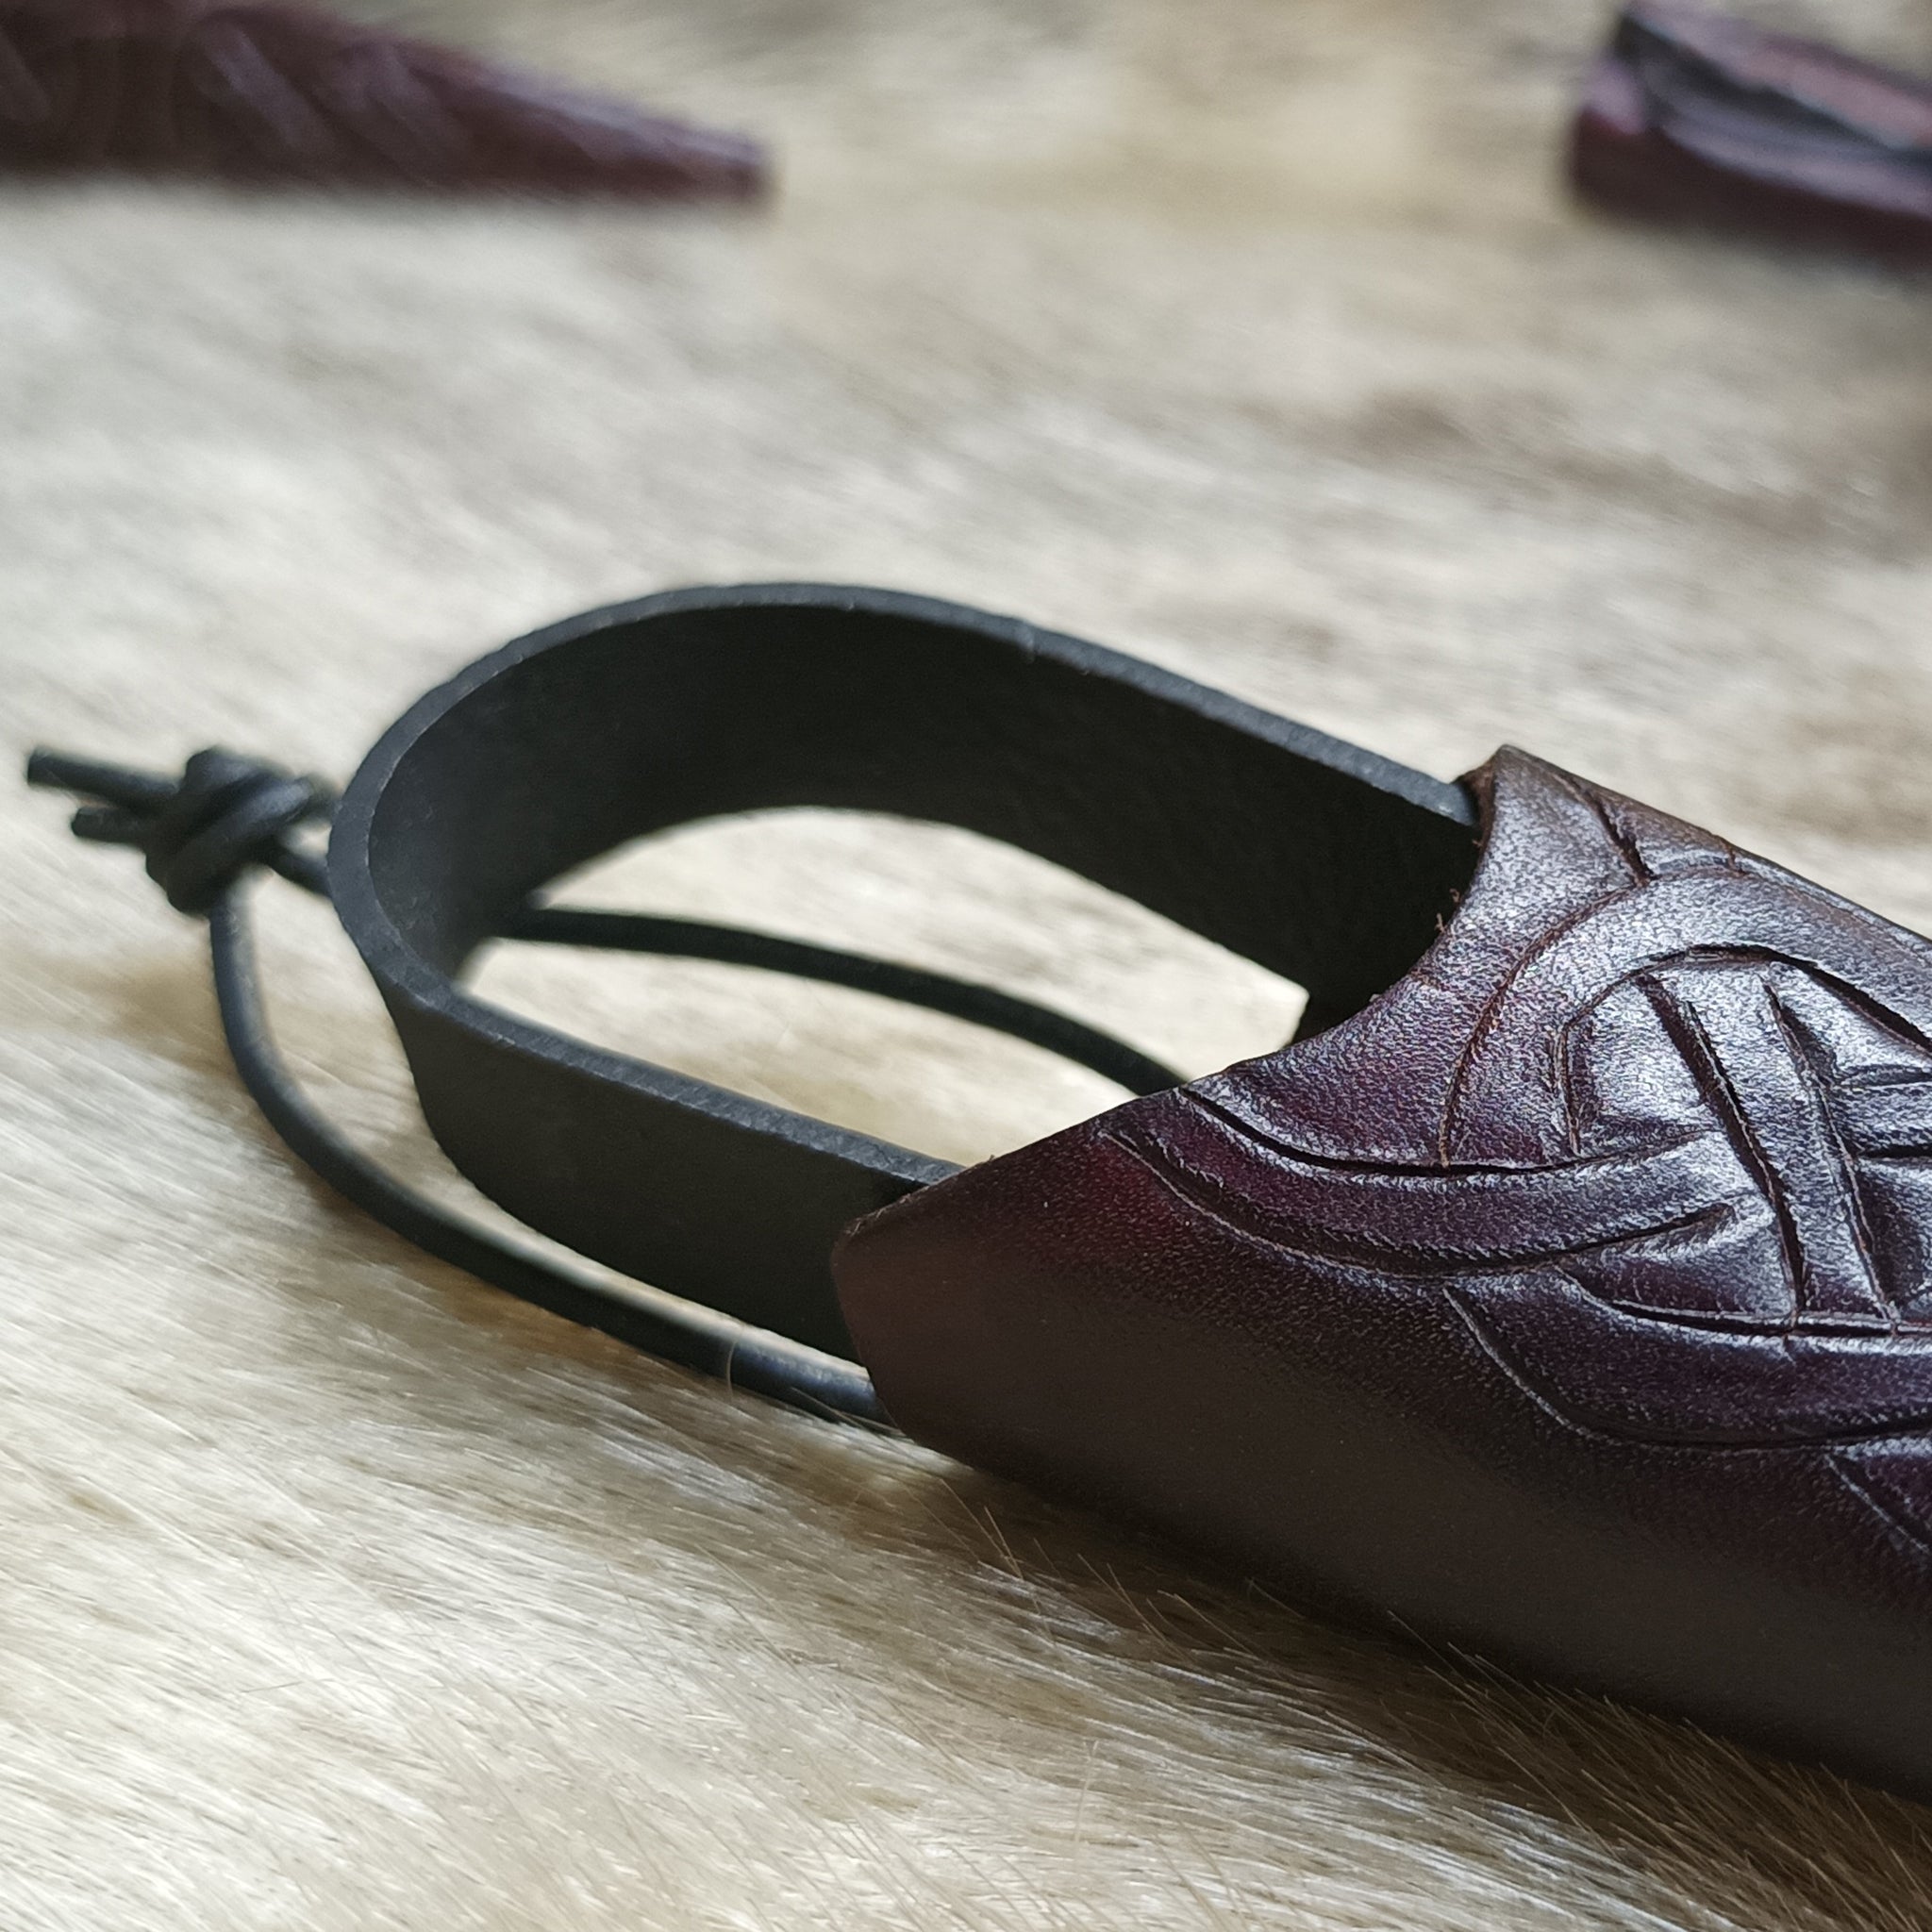 Sewing Snips in Leather Case - Nordic Trader - Viking Age, Late Roman and  Early Medieval Jewelry Everyday Items for Viking Age Re-Enactment